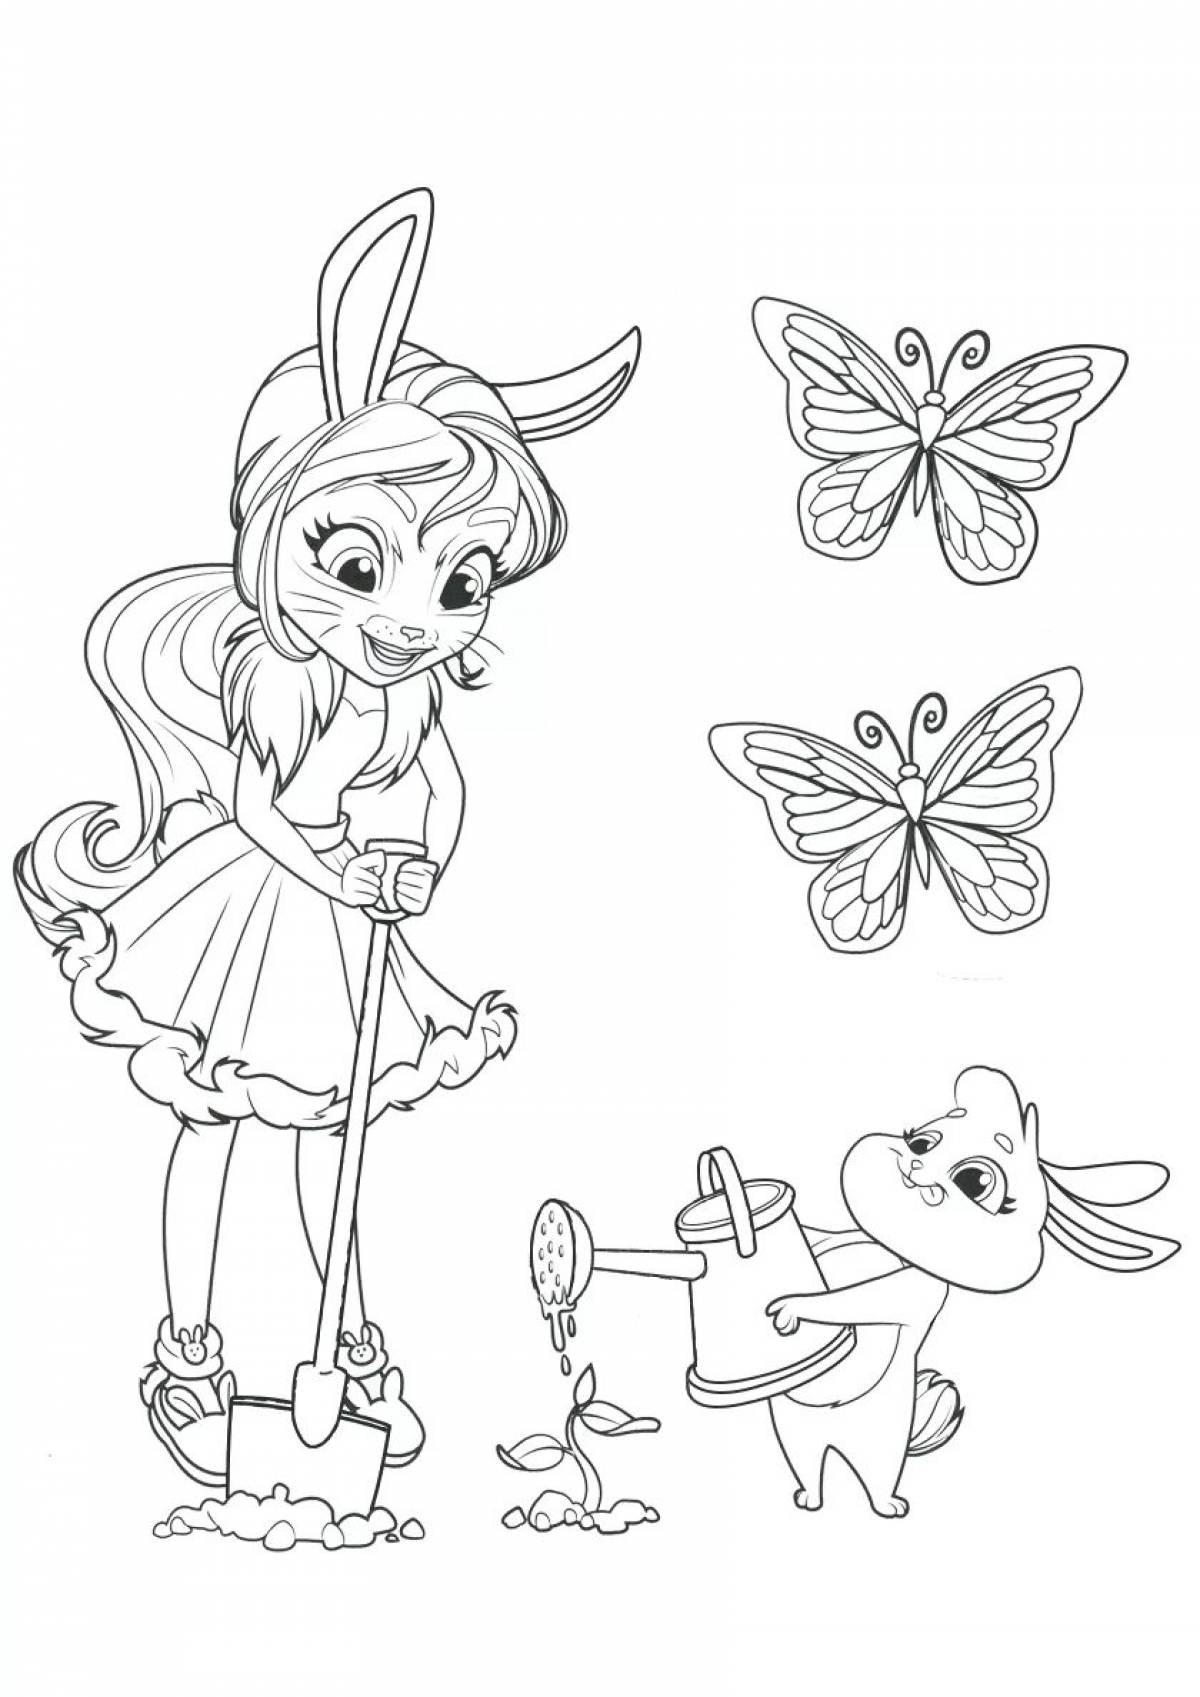 Outstanding rabbit coloring page